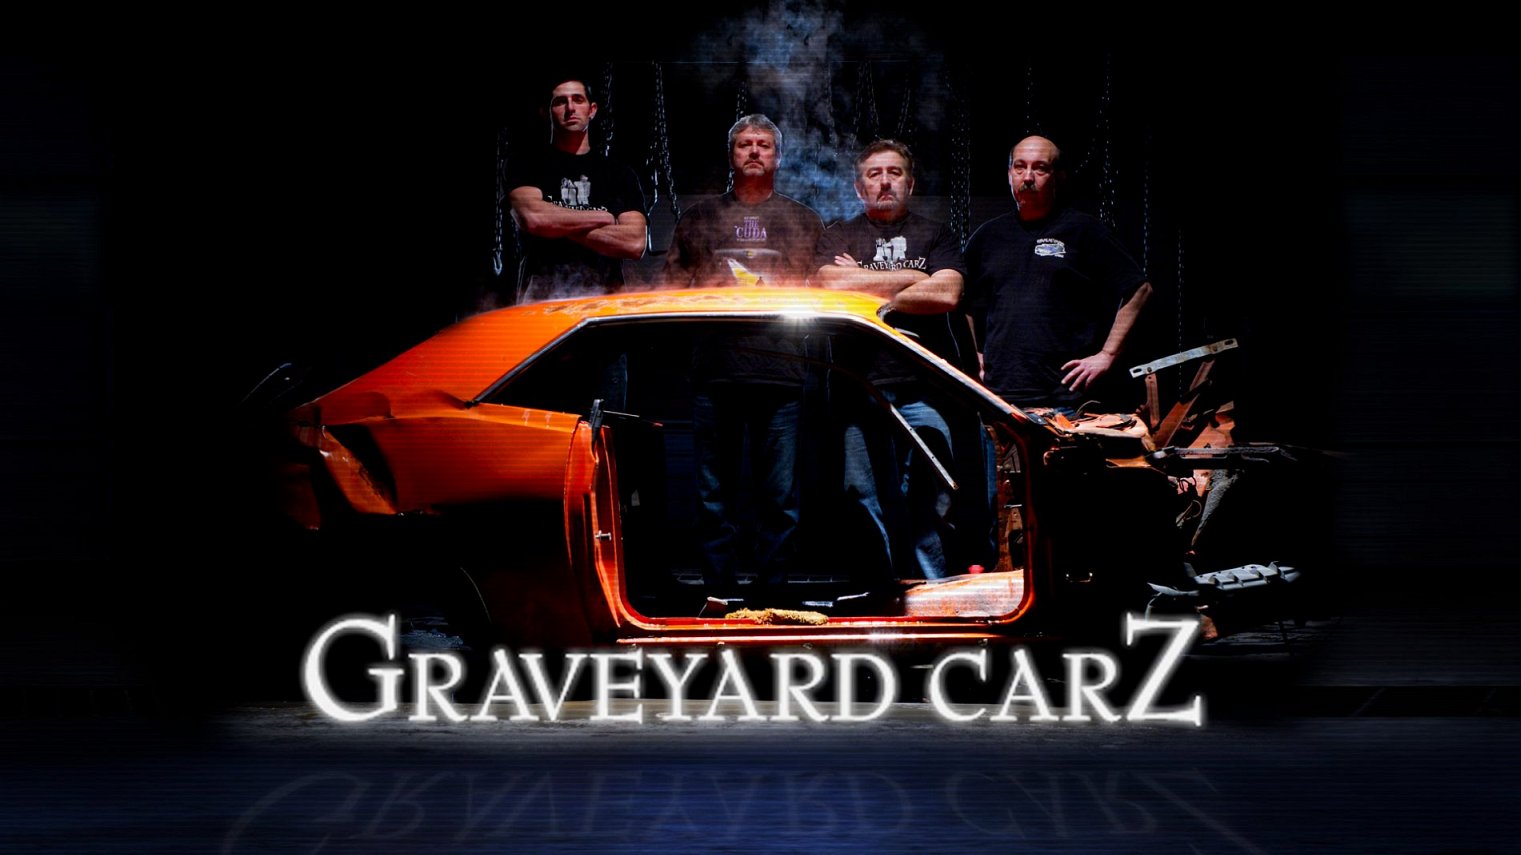 what time does Graveyard Carz come on